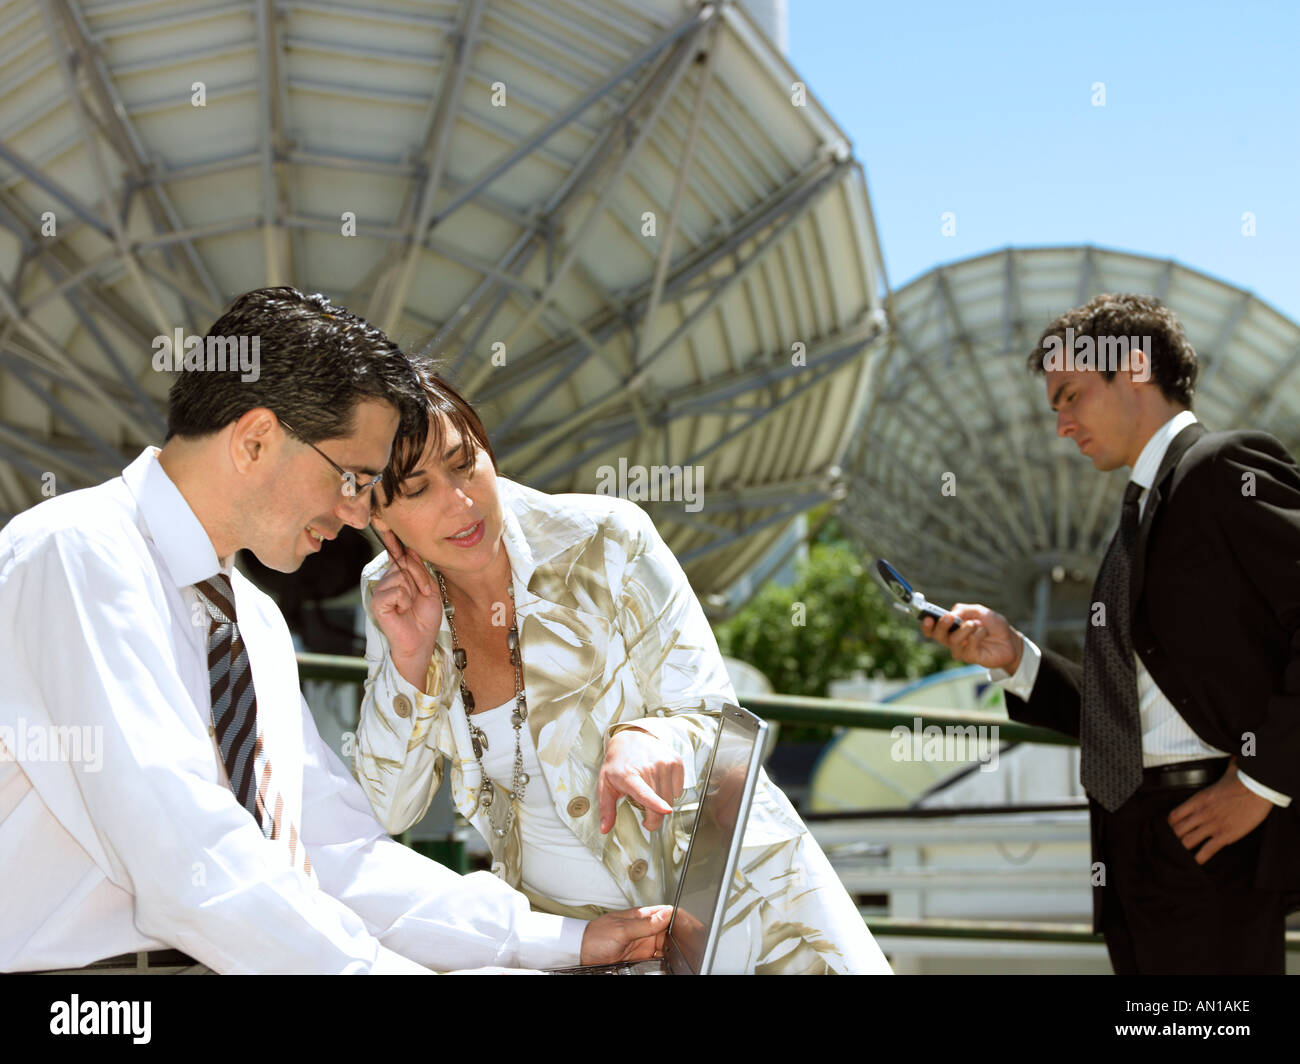 Three professionals on a rooftop Stock Photo